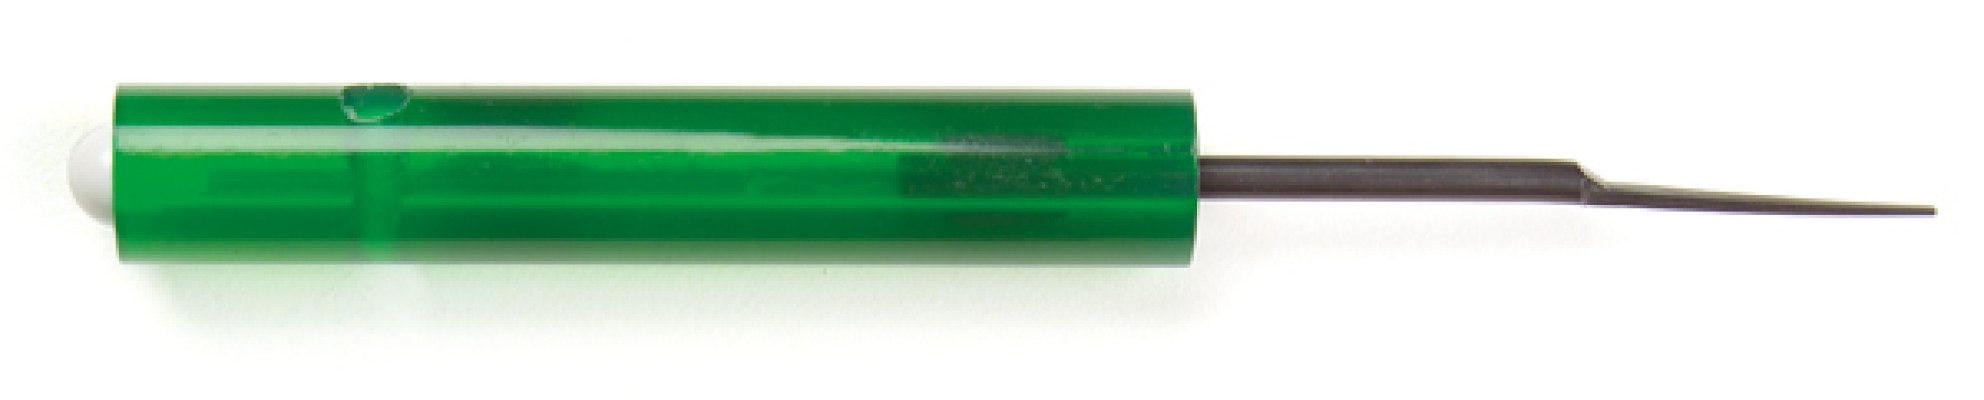 Image of Removal Tool For "Metri; Pack" Terminals, Narrow Blade, Green from Grote. Part number: 83-6521